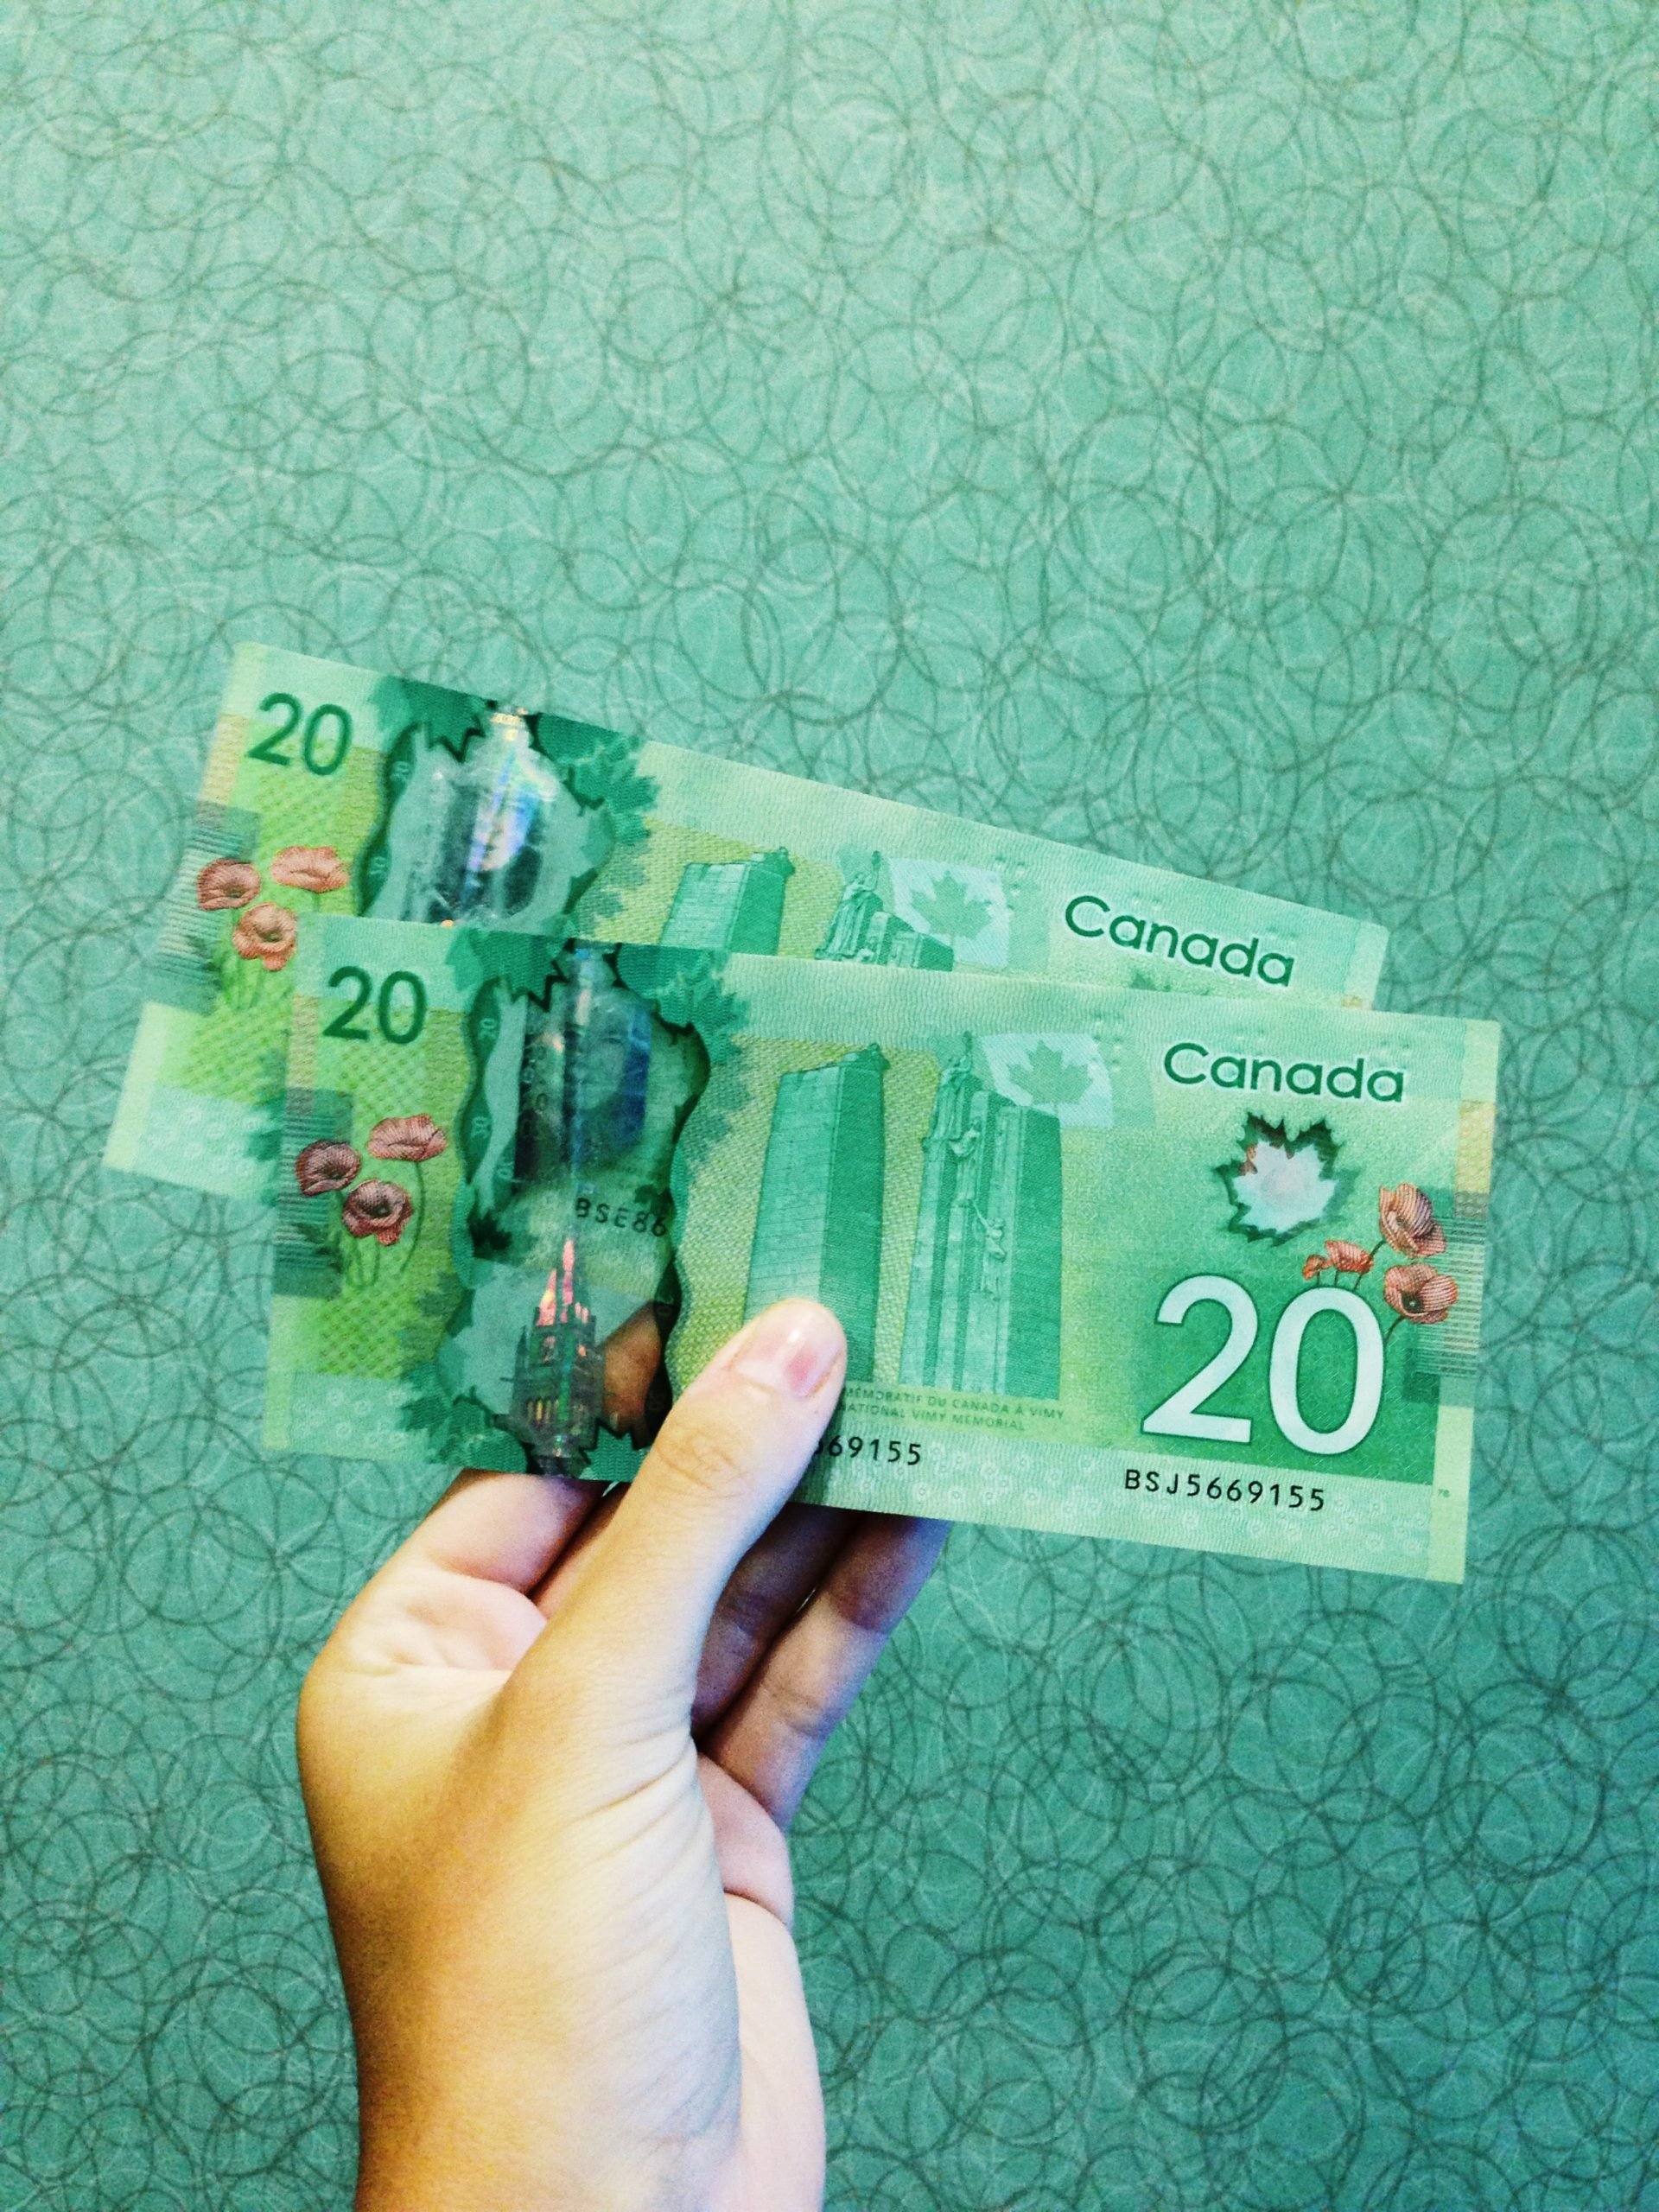 Canada travel tips, things to know before visiting Canada, facts about Canada, Canadian Dollars
